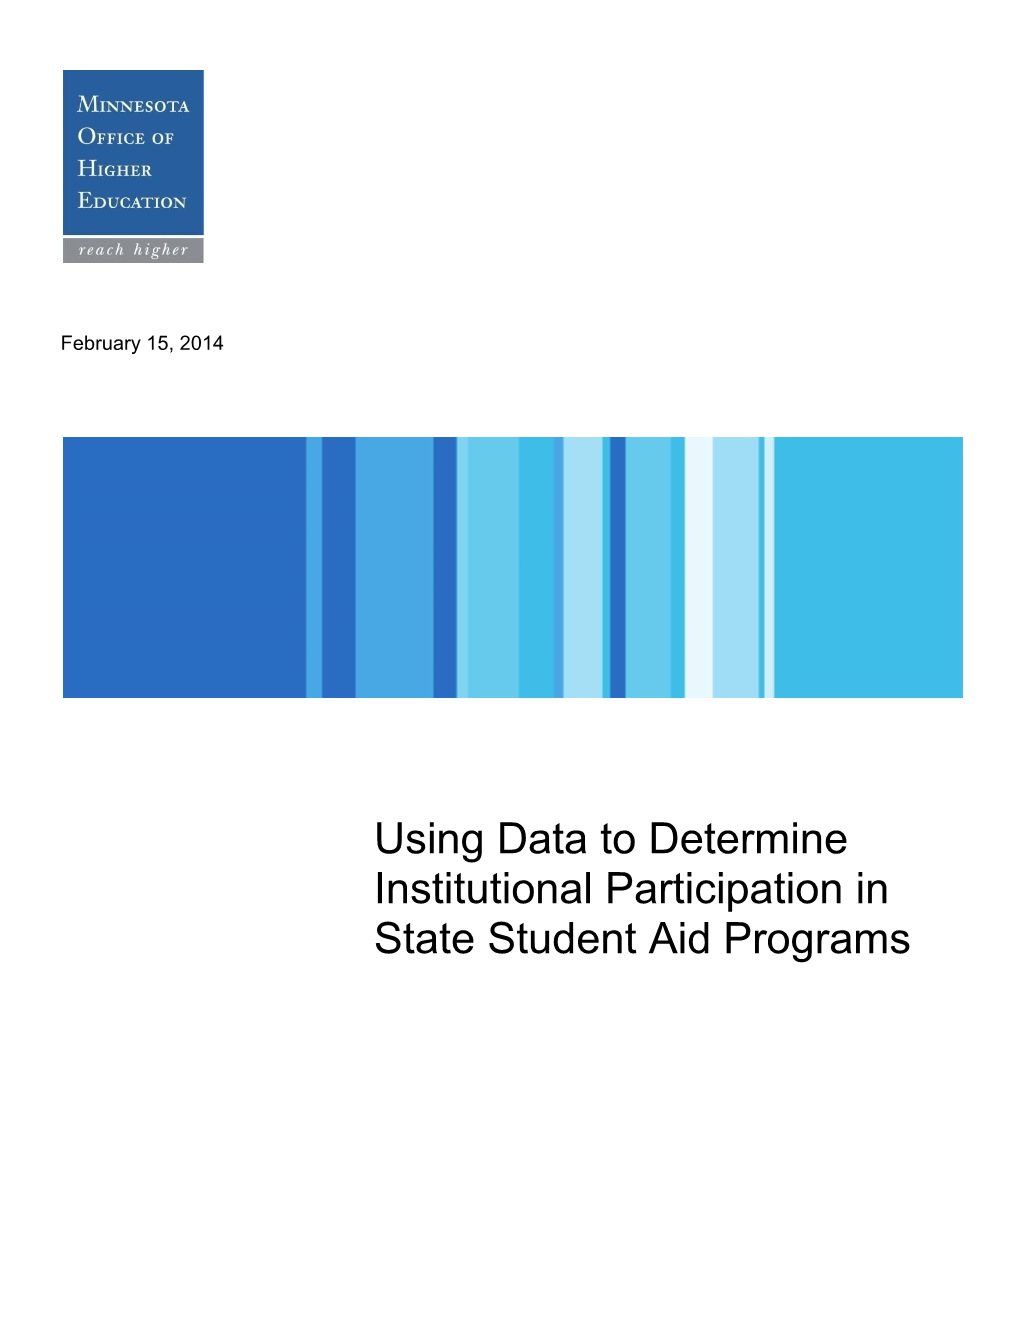 Using Data to Determine Institutional Participation in State Student Aid Programs